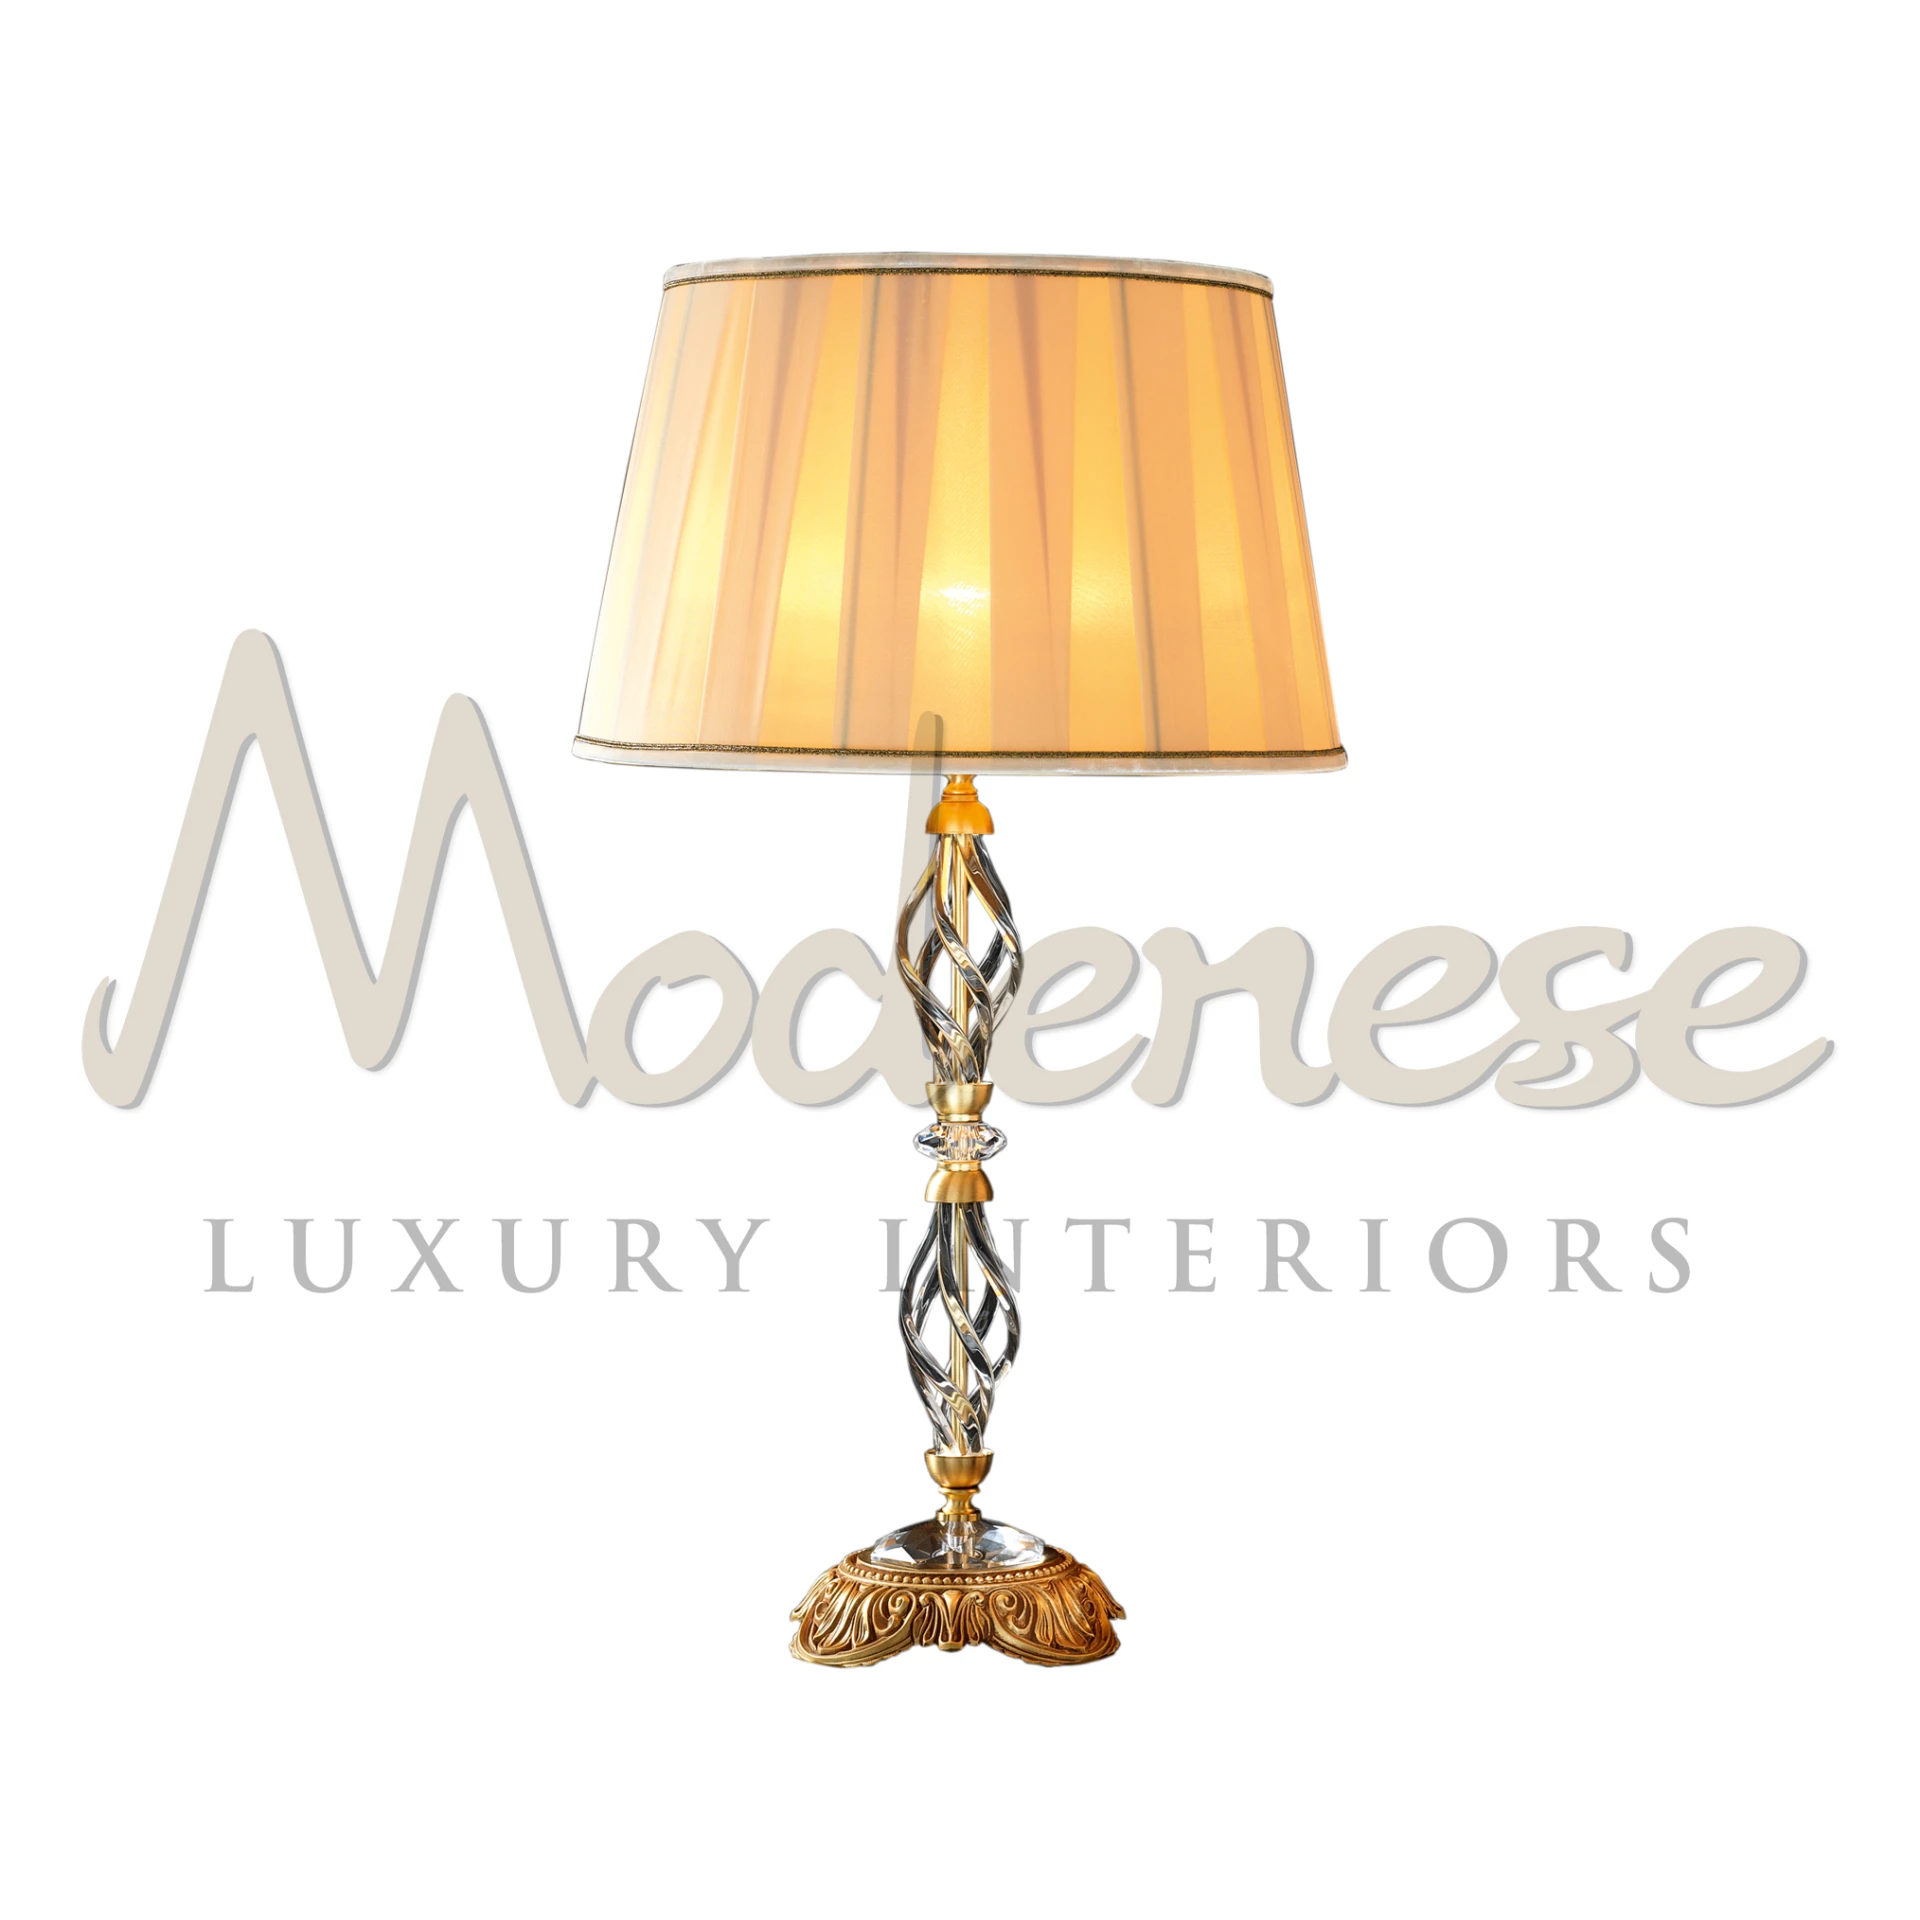 Elegant Table Lamp with a twisted brass and silver stem and warm amber shade.